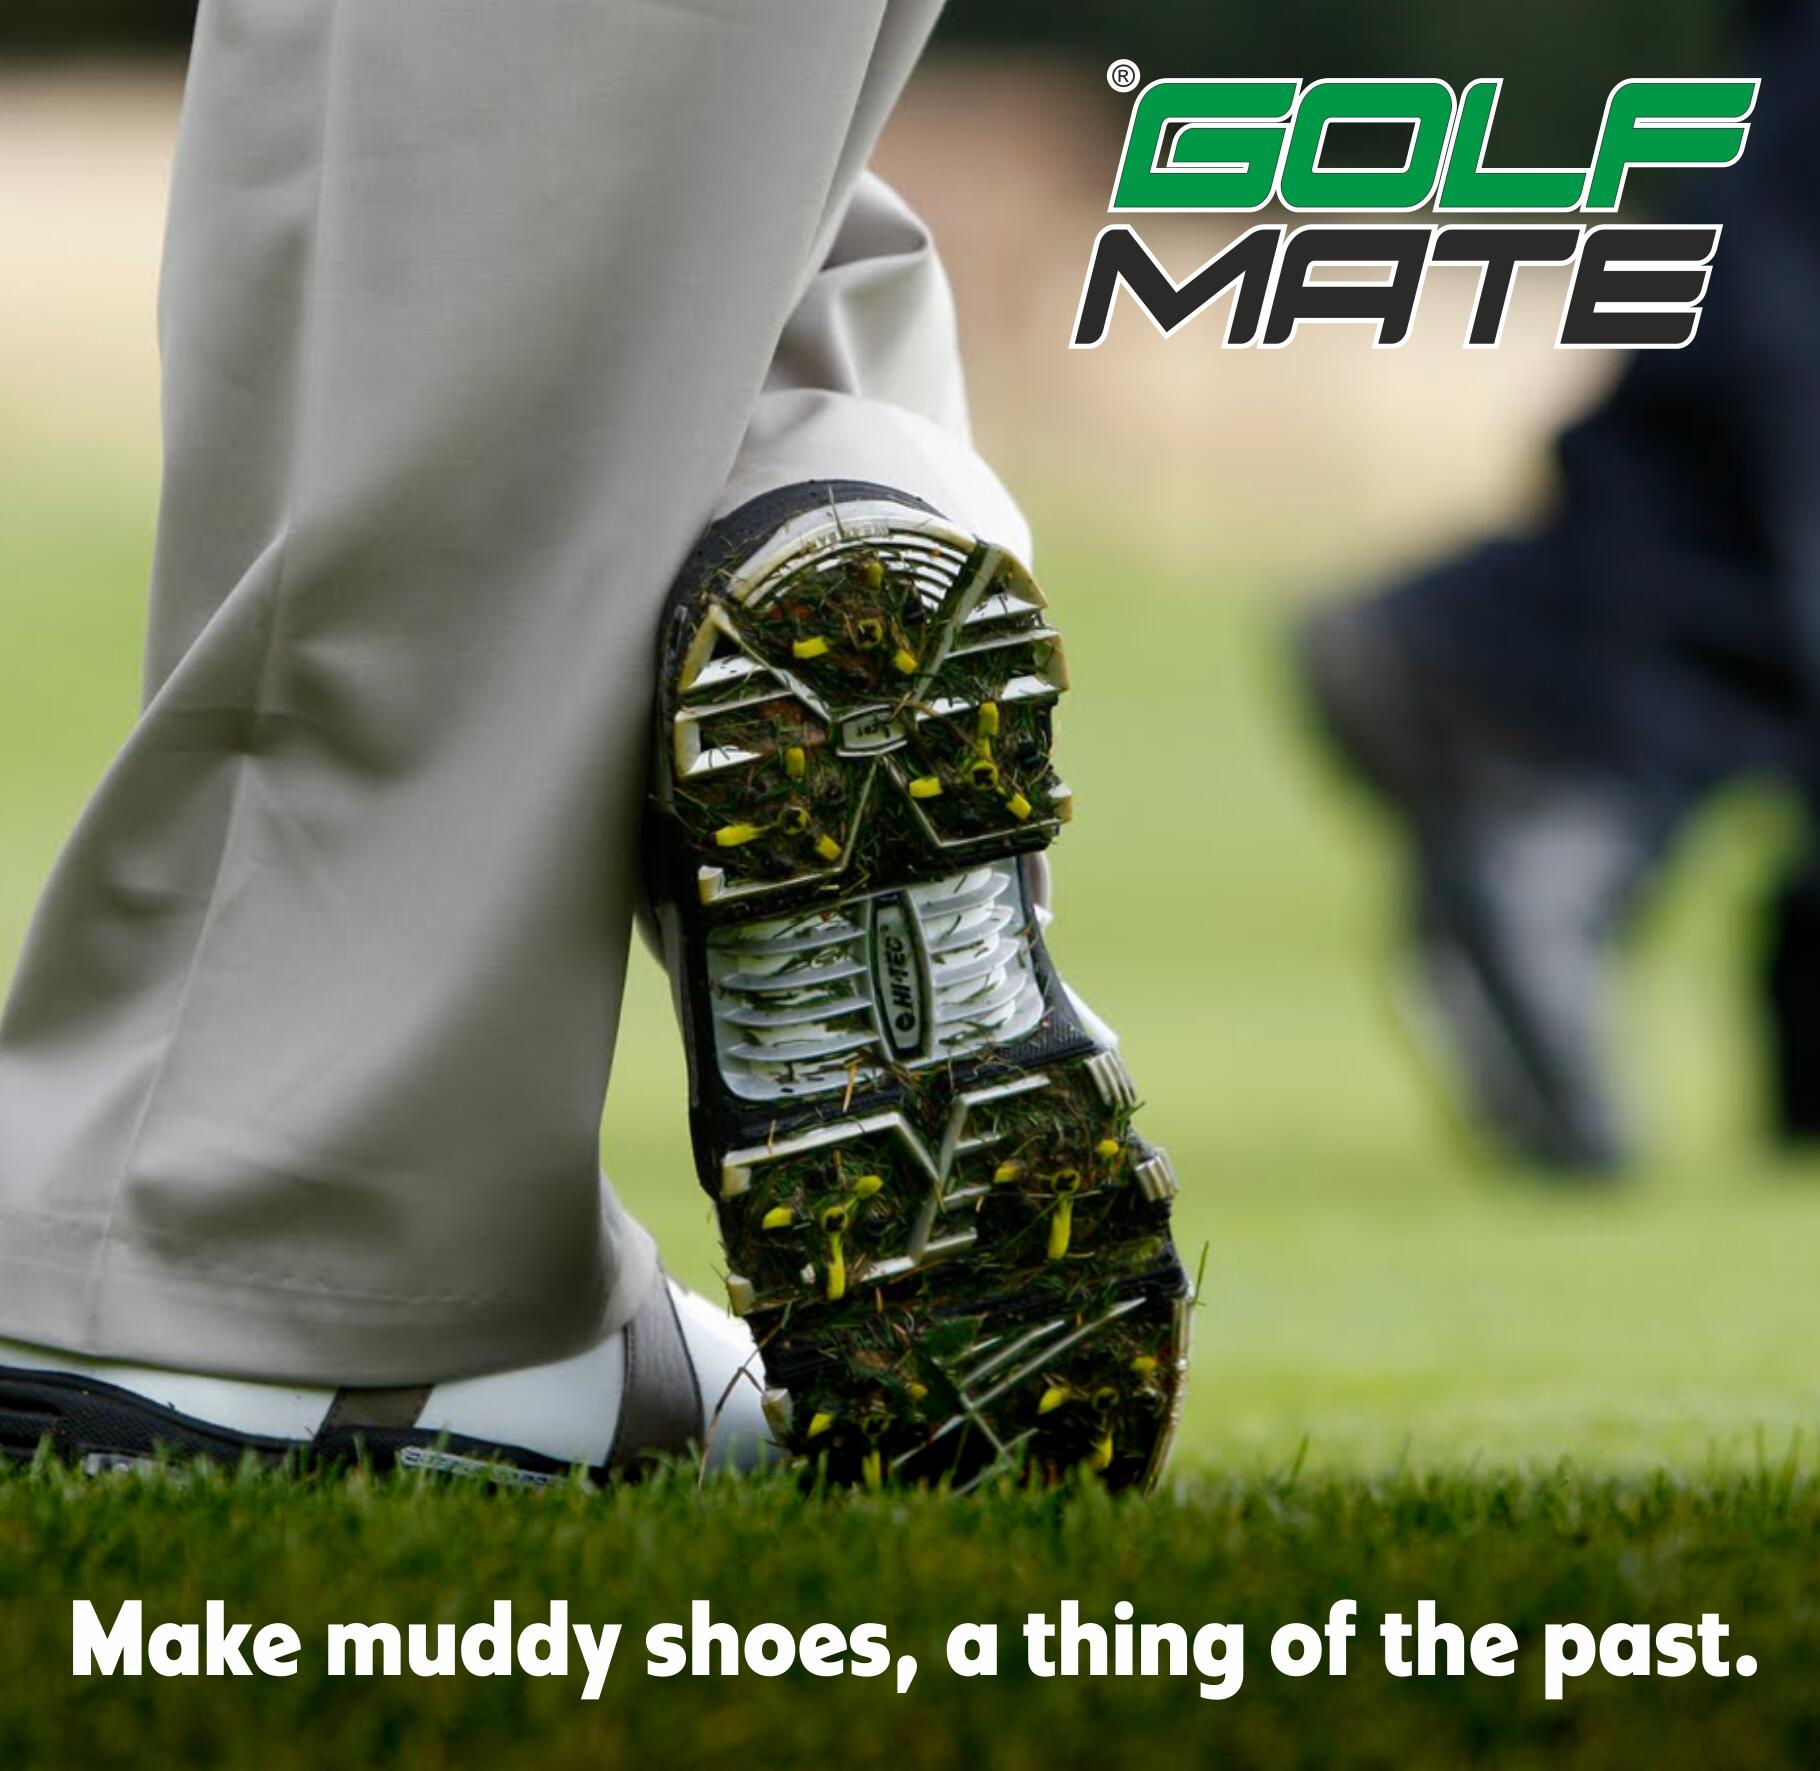 Golf Mate – The ultimate cleaning kit for golf shoes, clubs & trolley wheels. 3/8